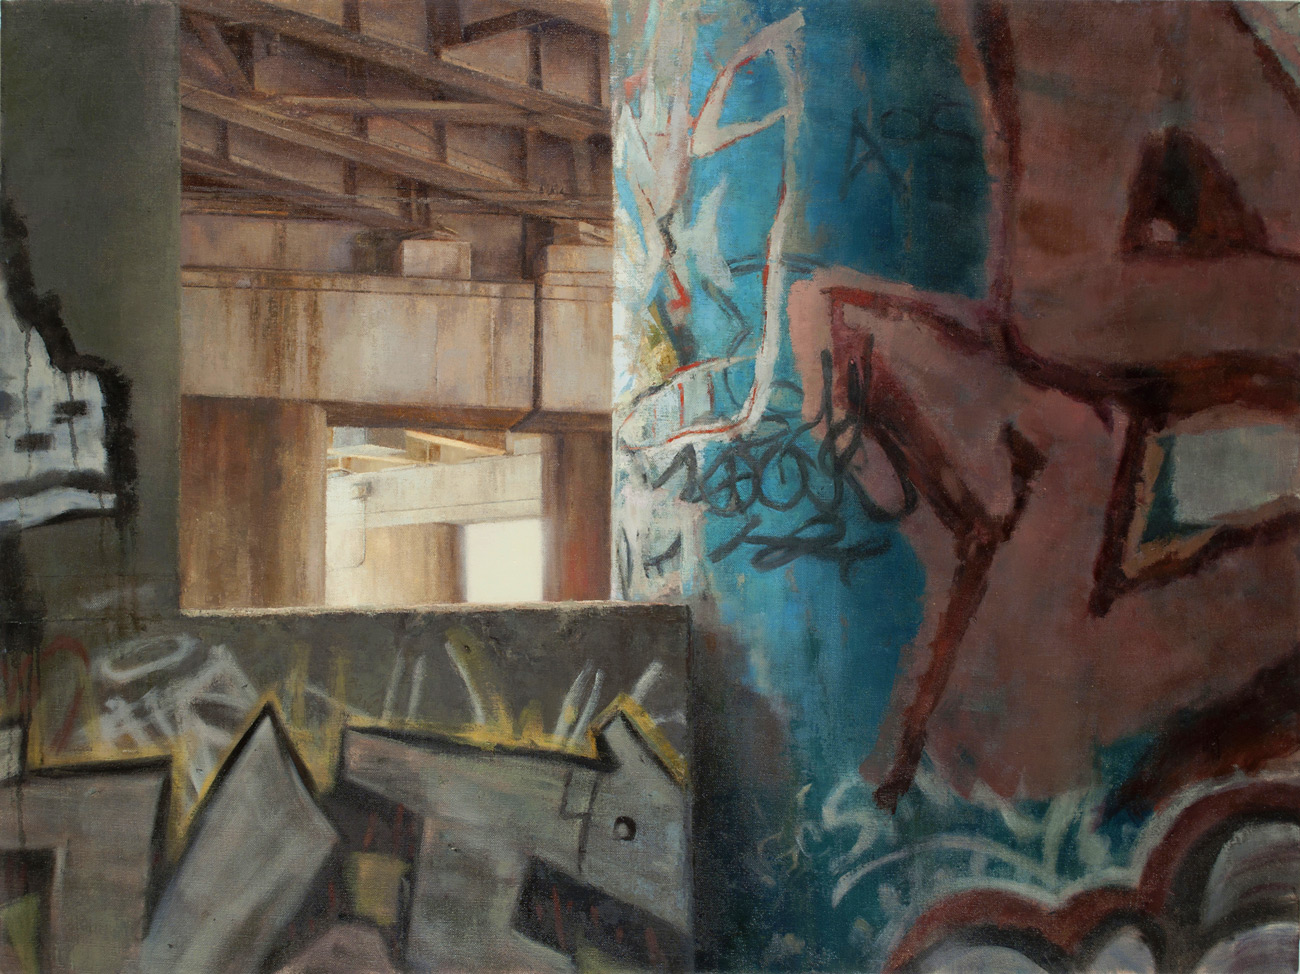   Crooked , 2011 oil on linen, 36 x 48 in 